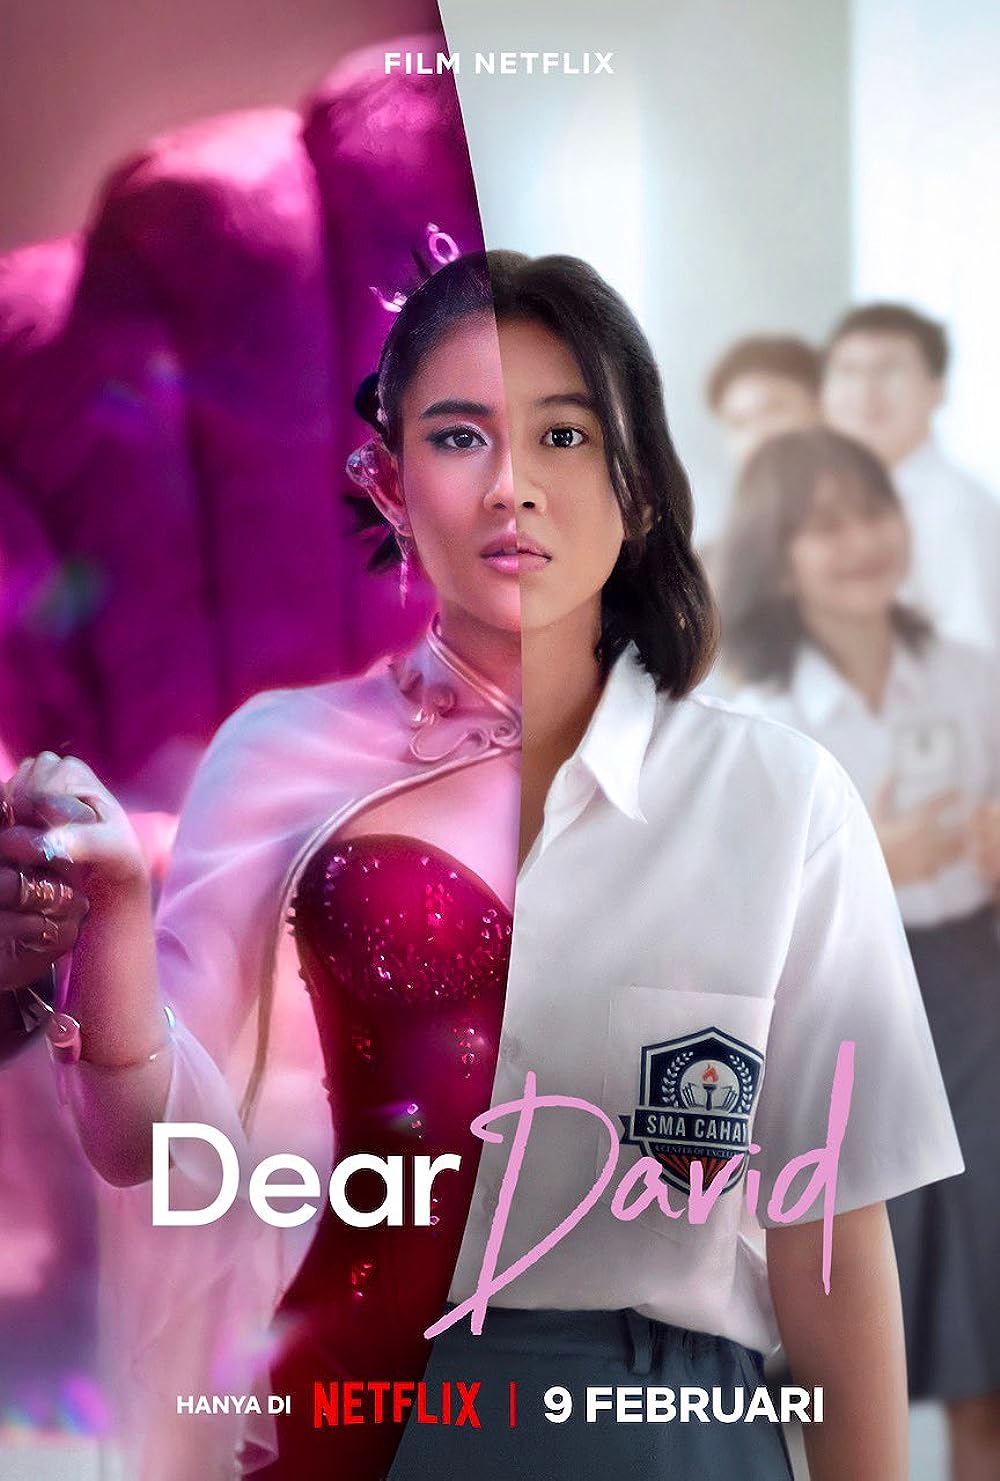  Dear David Movies 2023, Official Trailer, Release Date